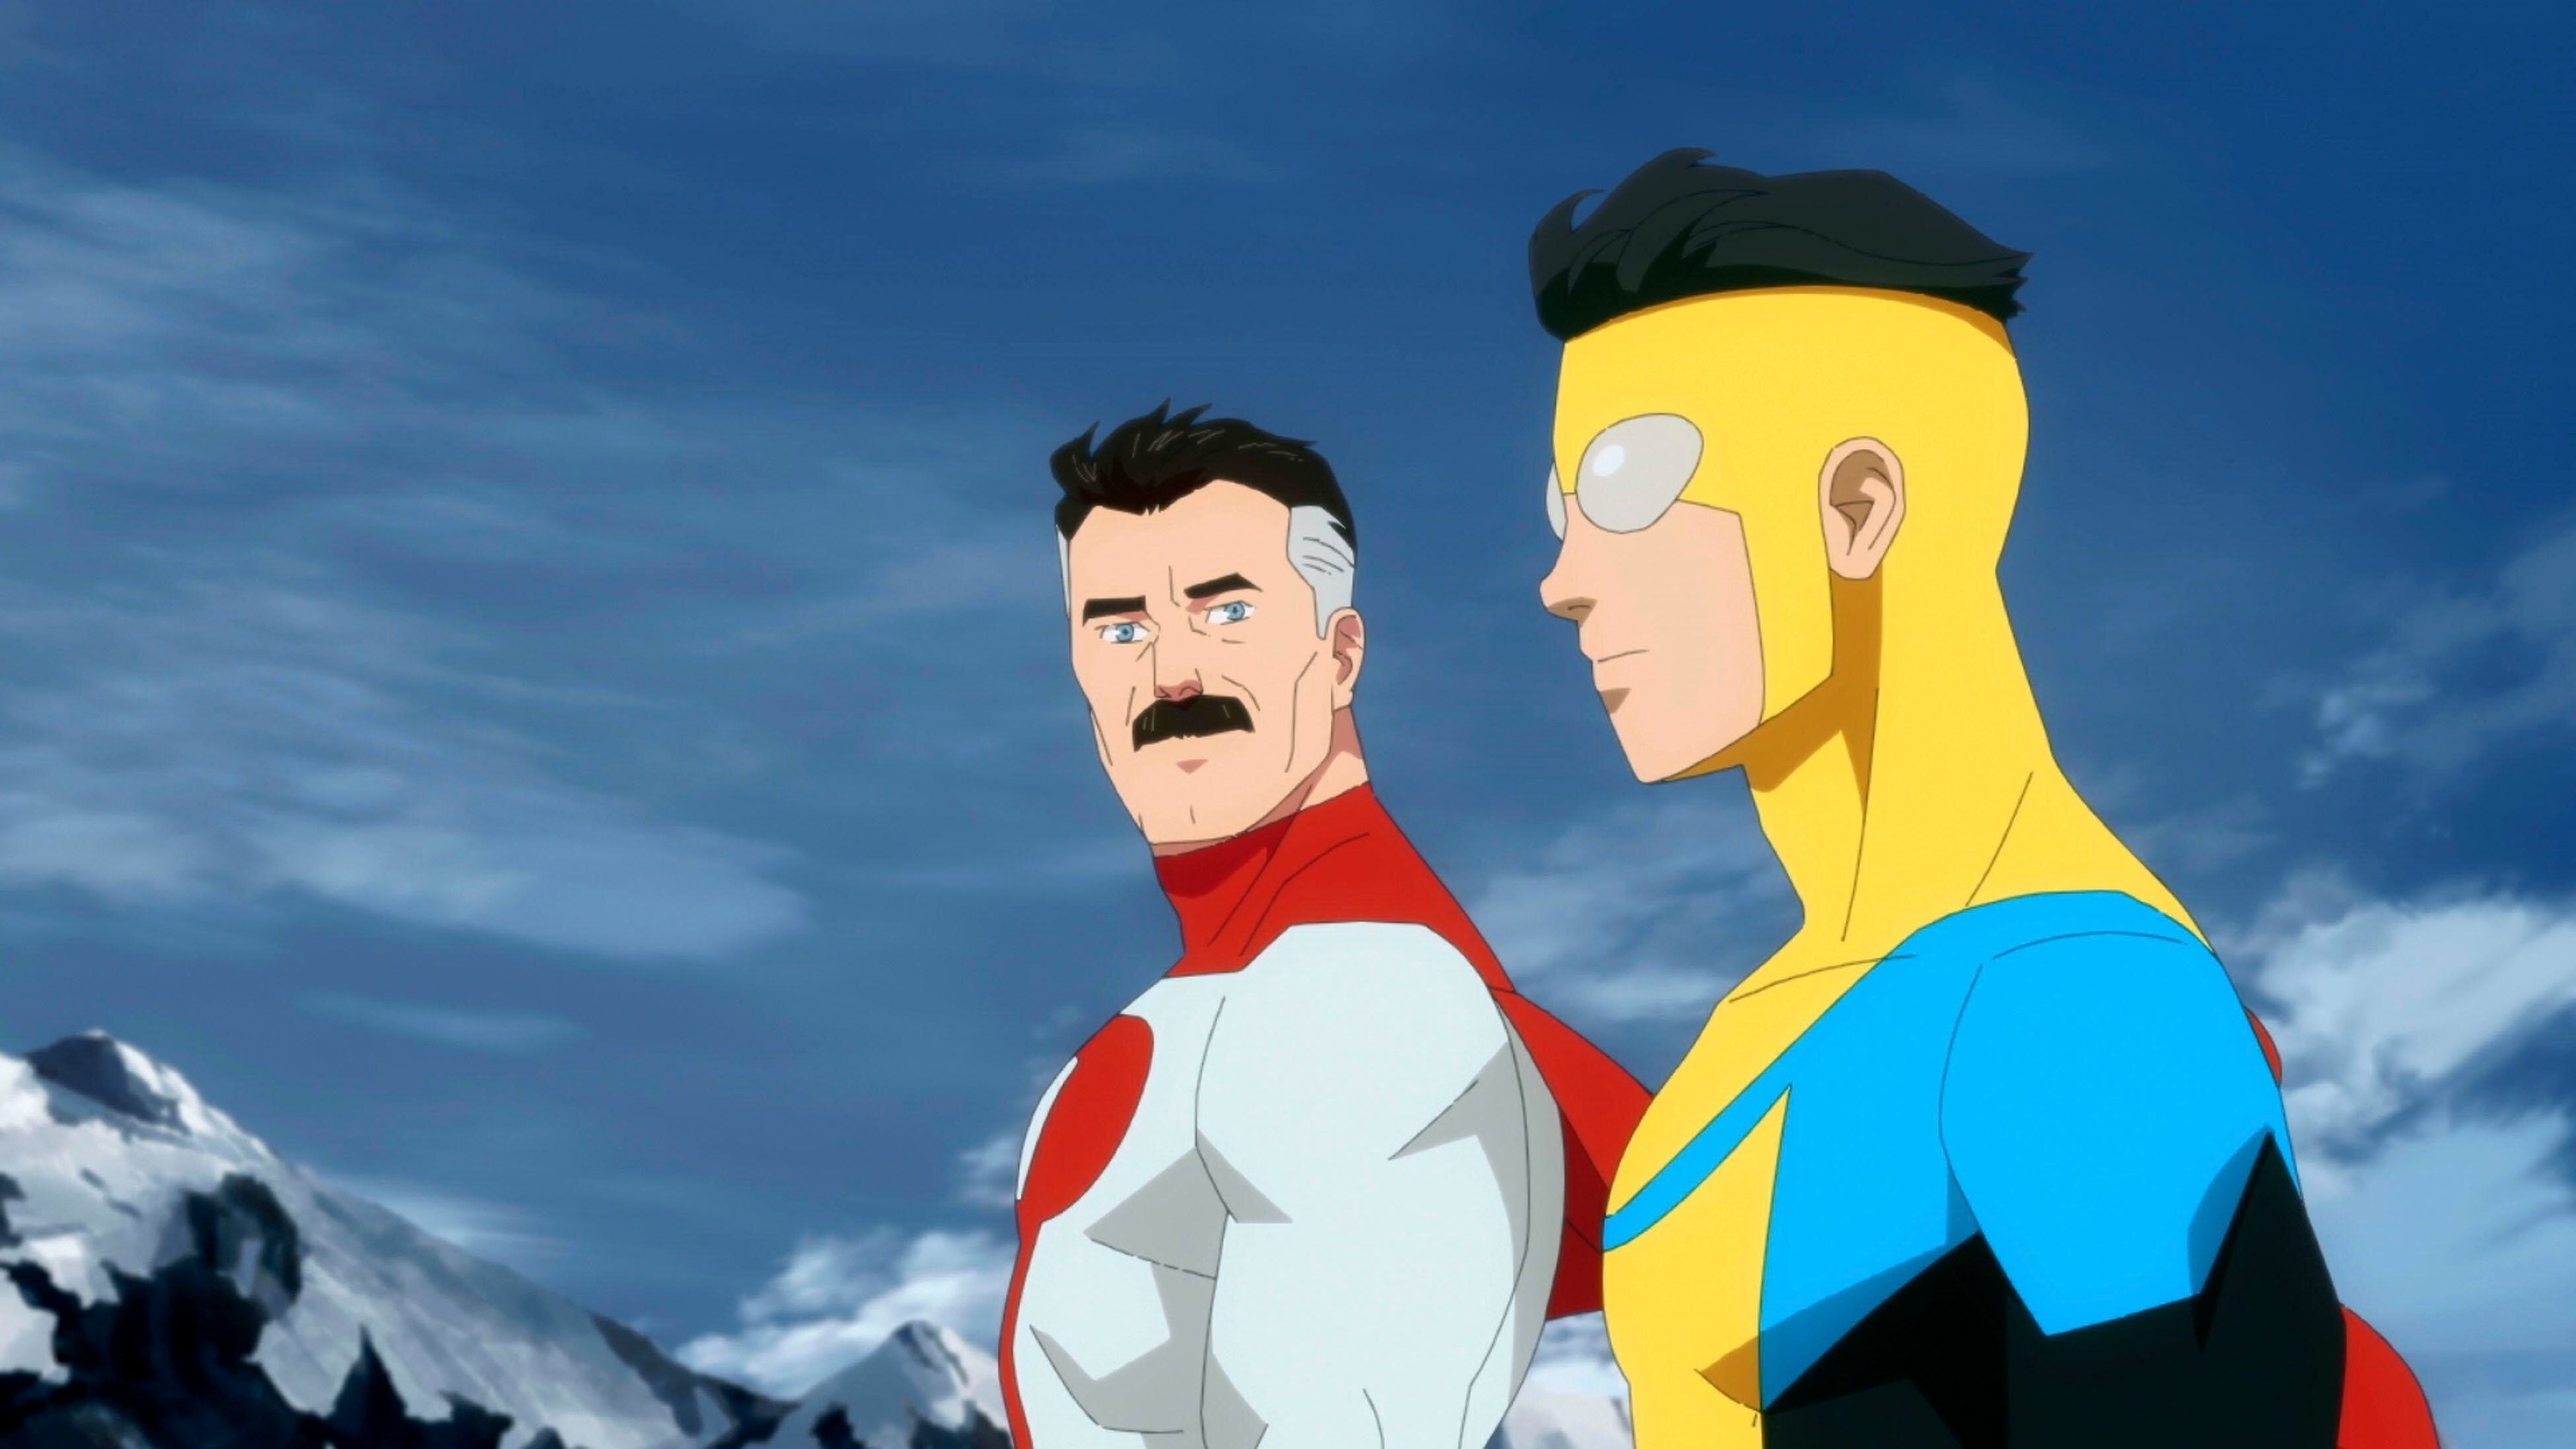 A father-son superhero team ruminates on their place in the world in &quot;Invincible&quot;